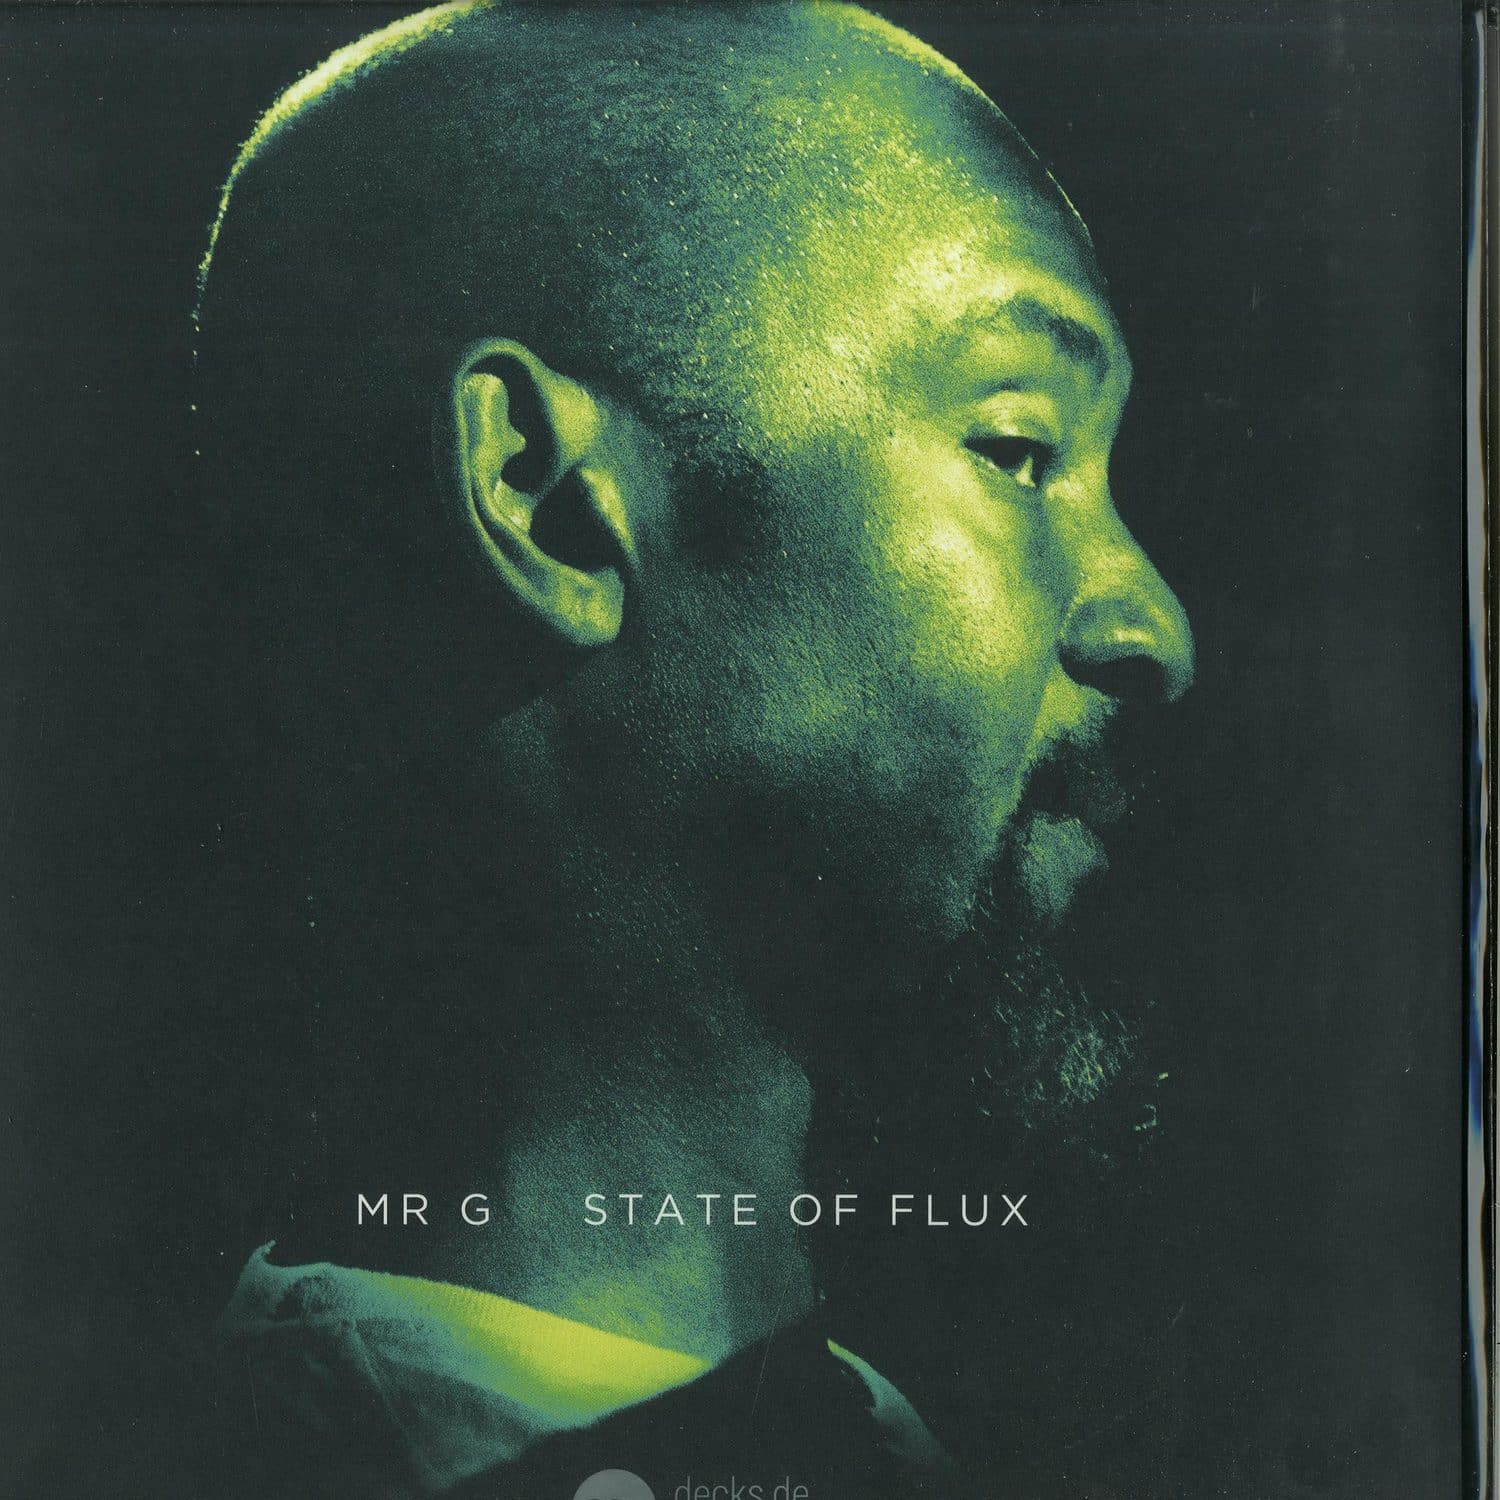 Mr. G - STATE OF FLUX